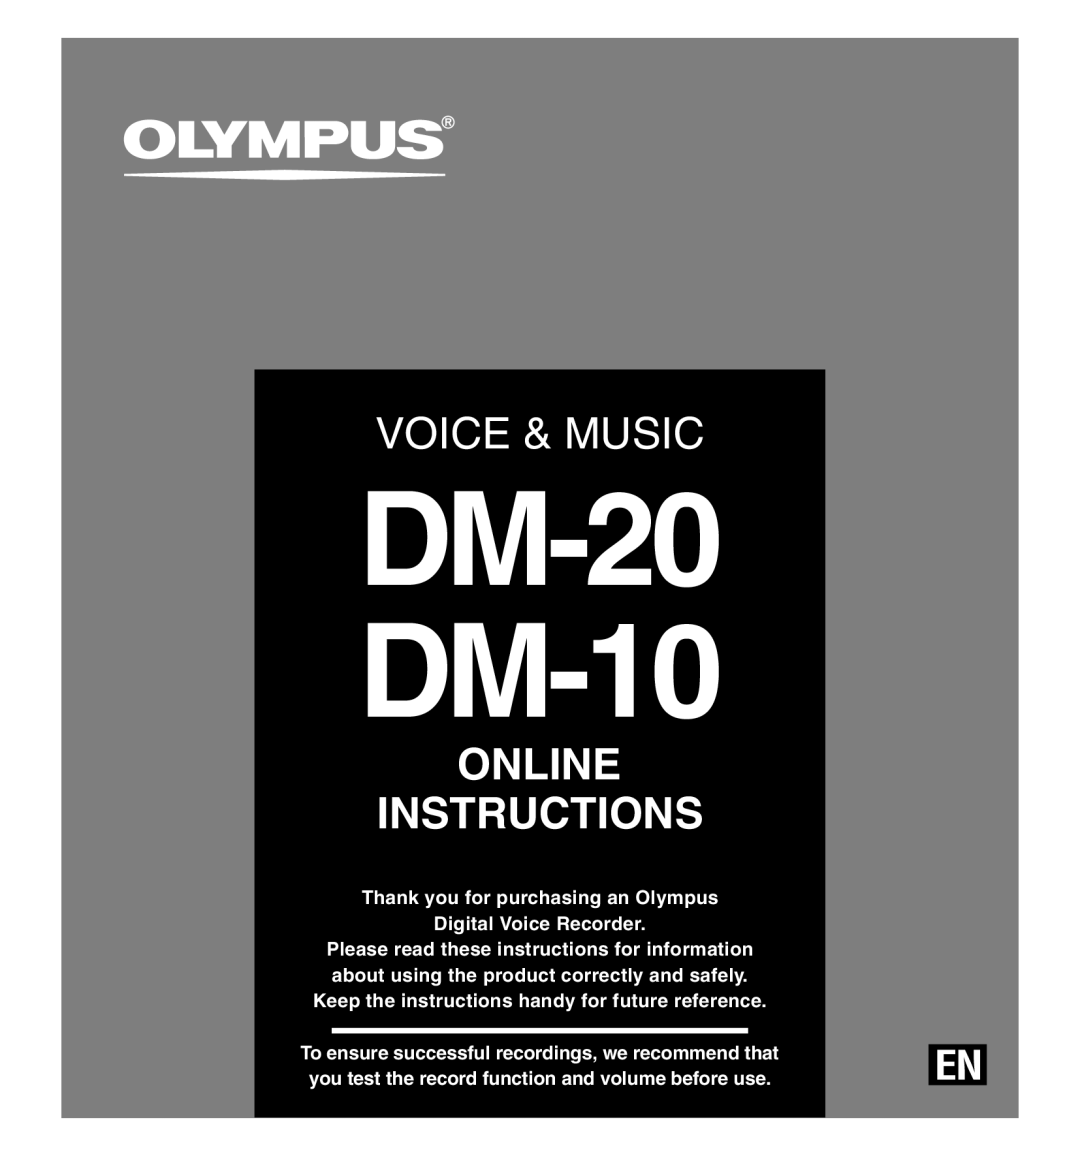 Olympus manual DM-20 DM-10, Voice & Music, Online Instructions, Keep the instructions handy for future reference 